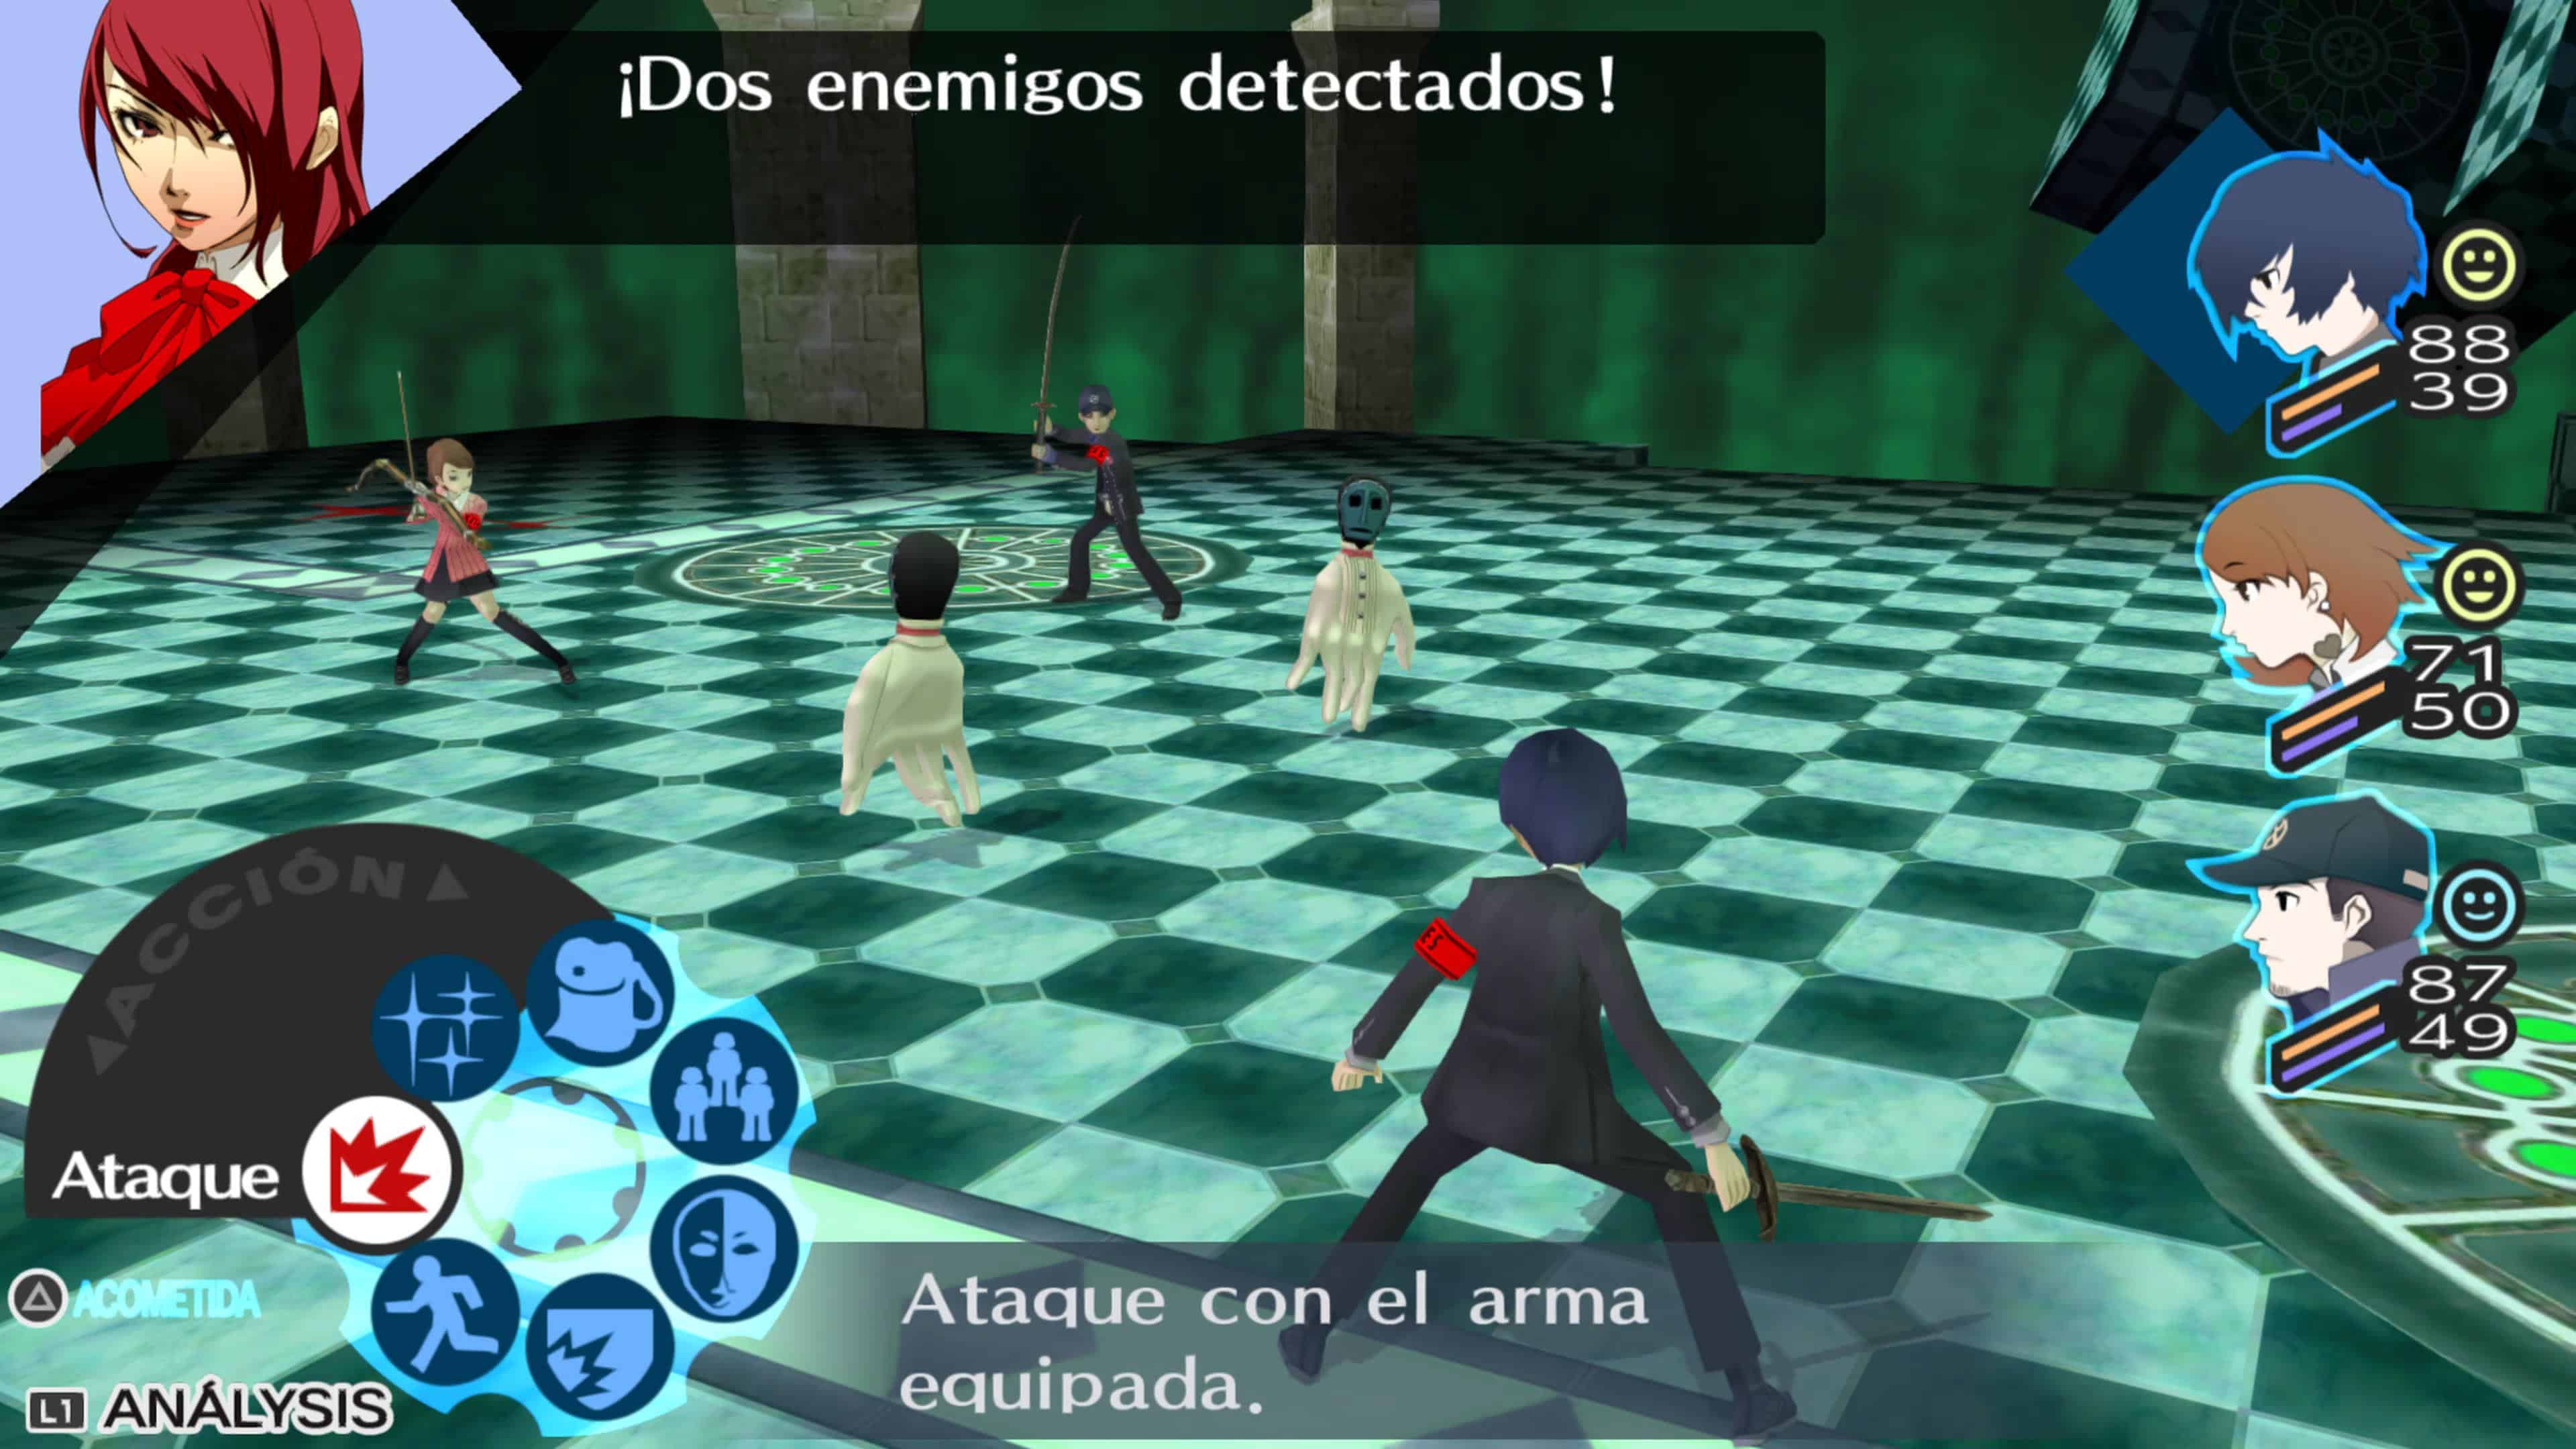 Persona 3 Portable Review